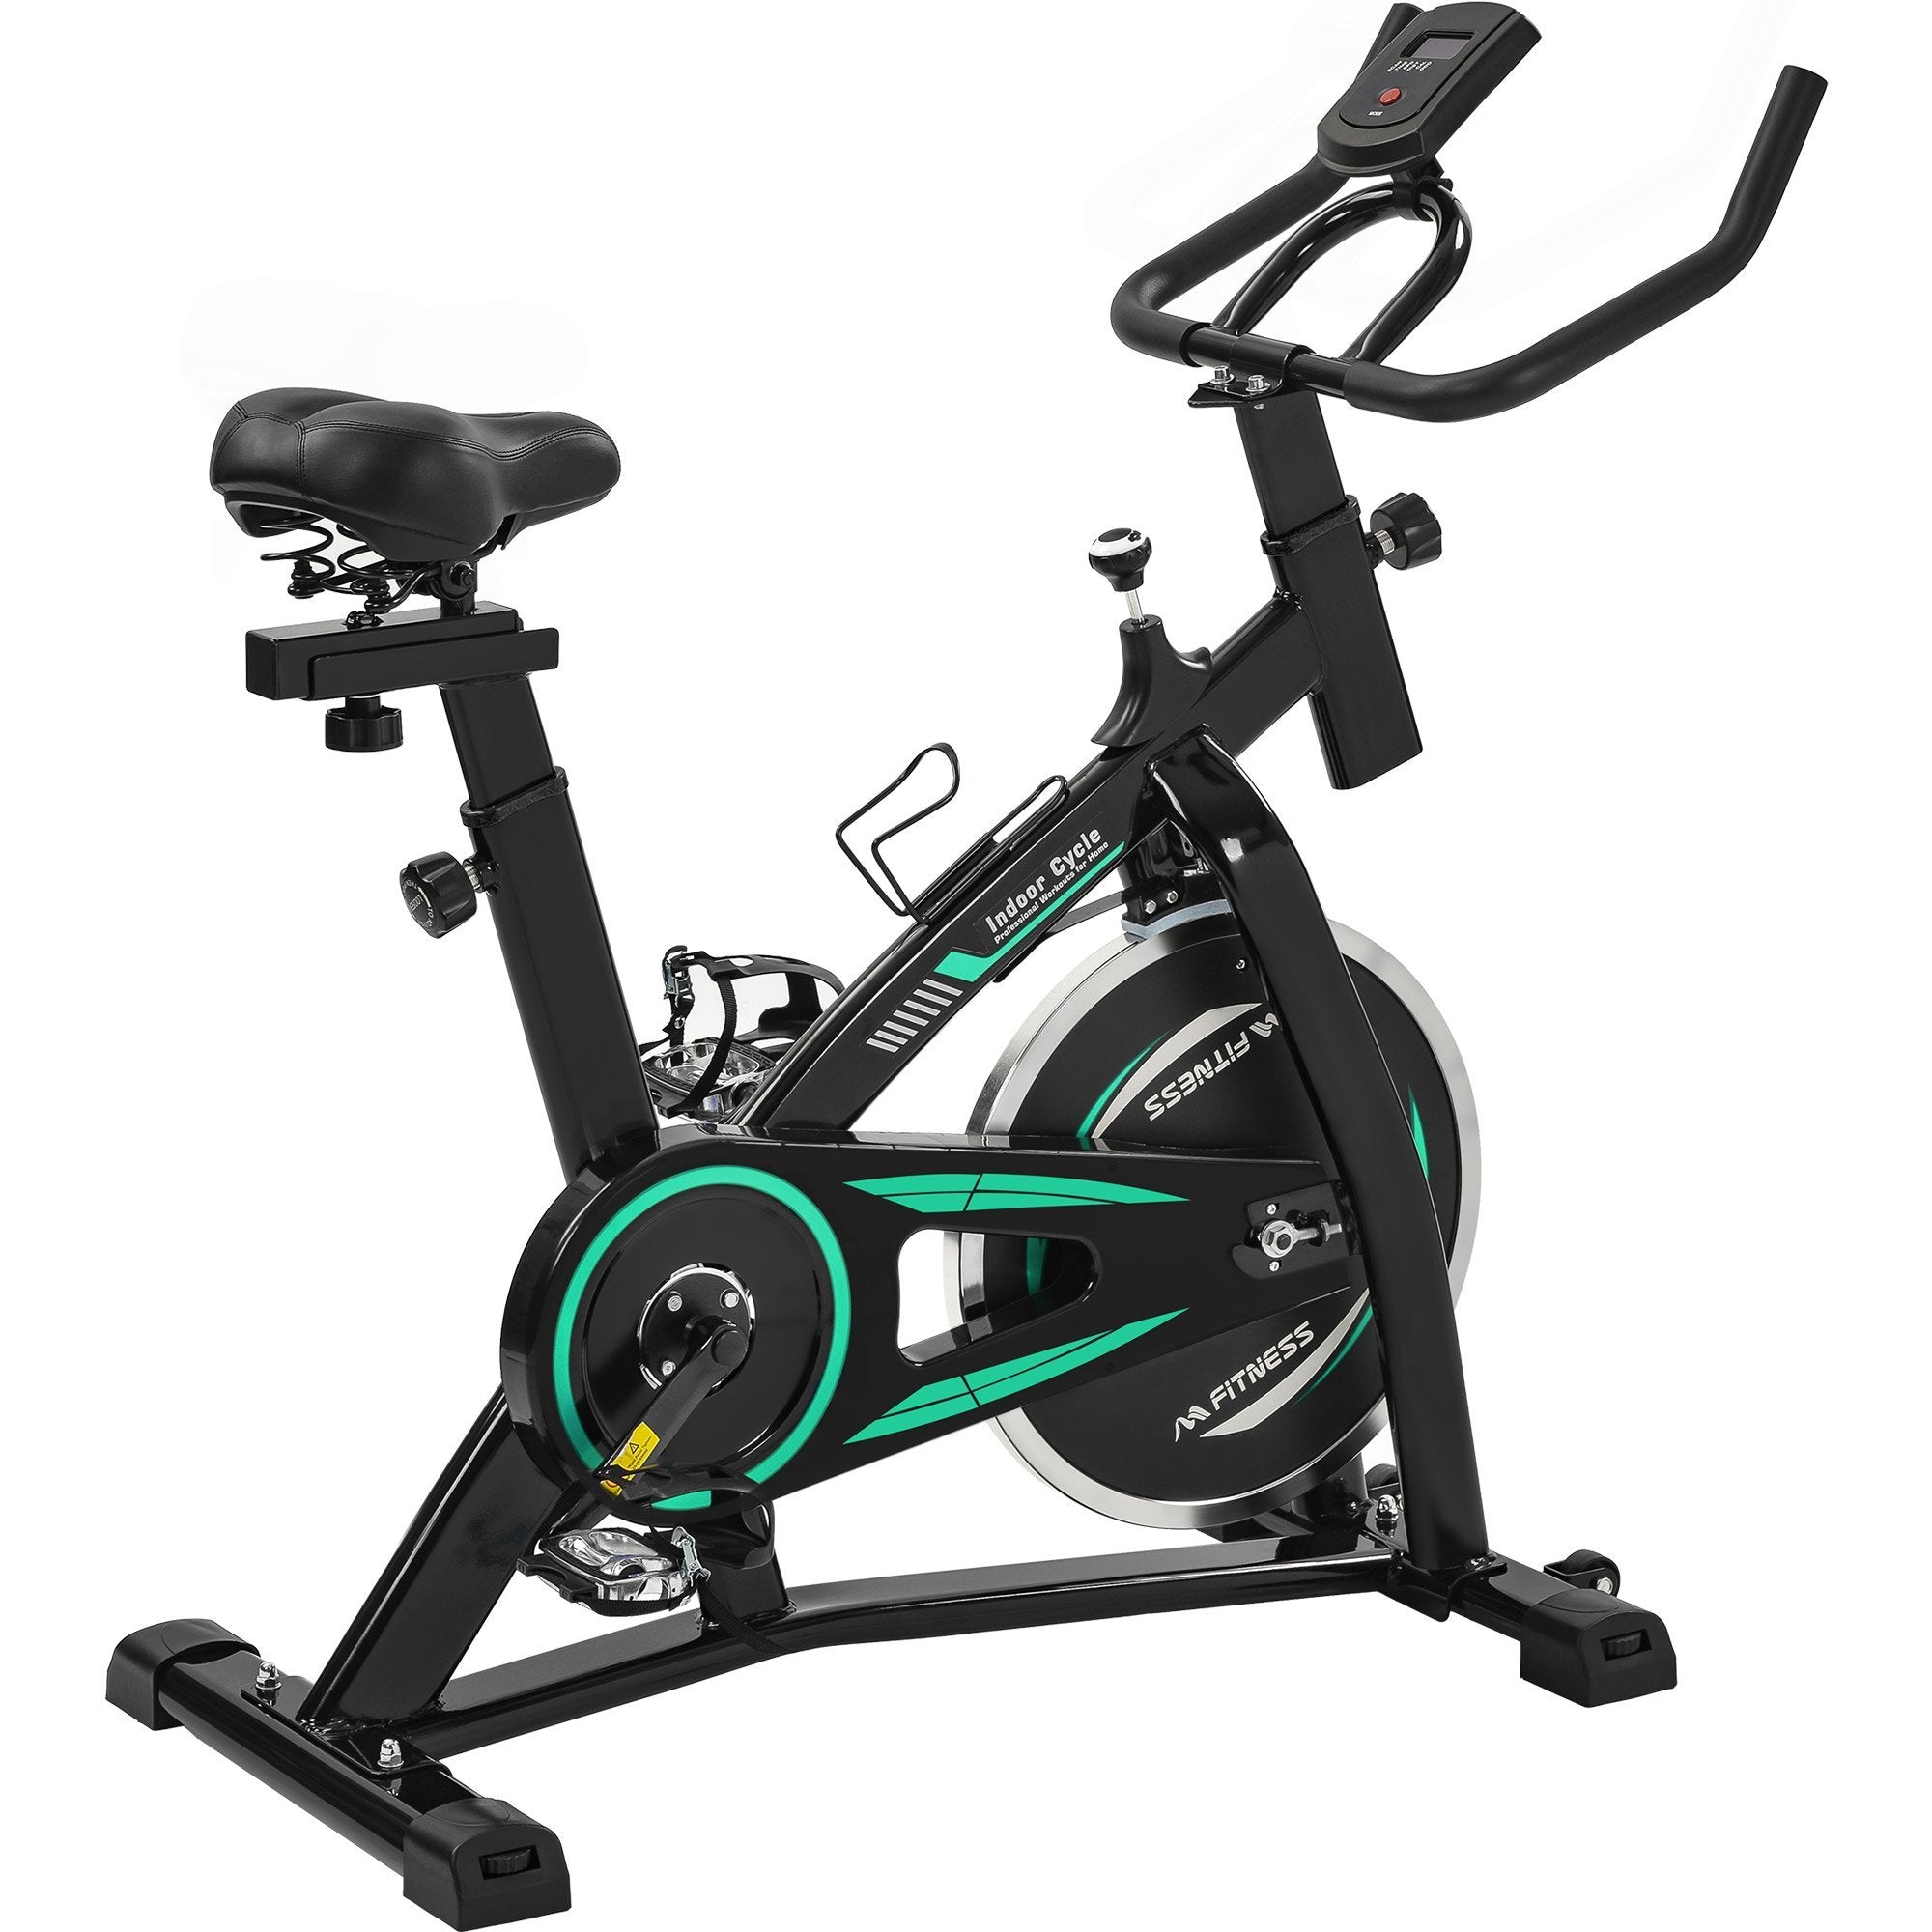 Belt Drive Exercise Bicycle with LCD Monitor